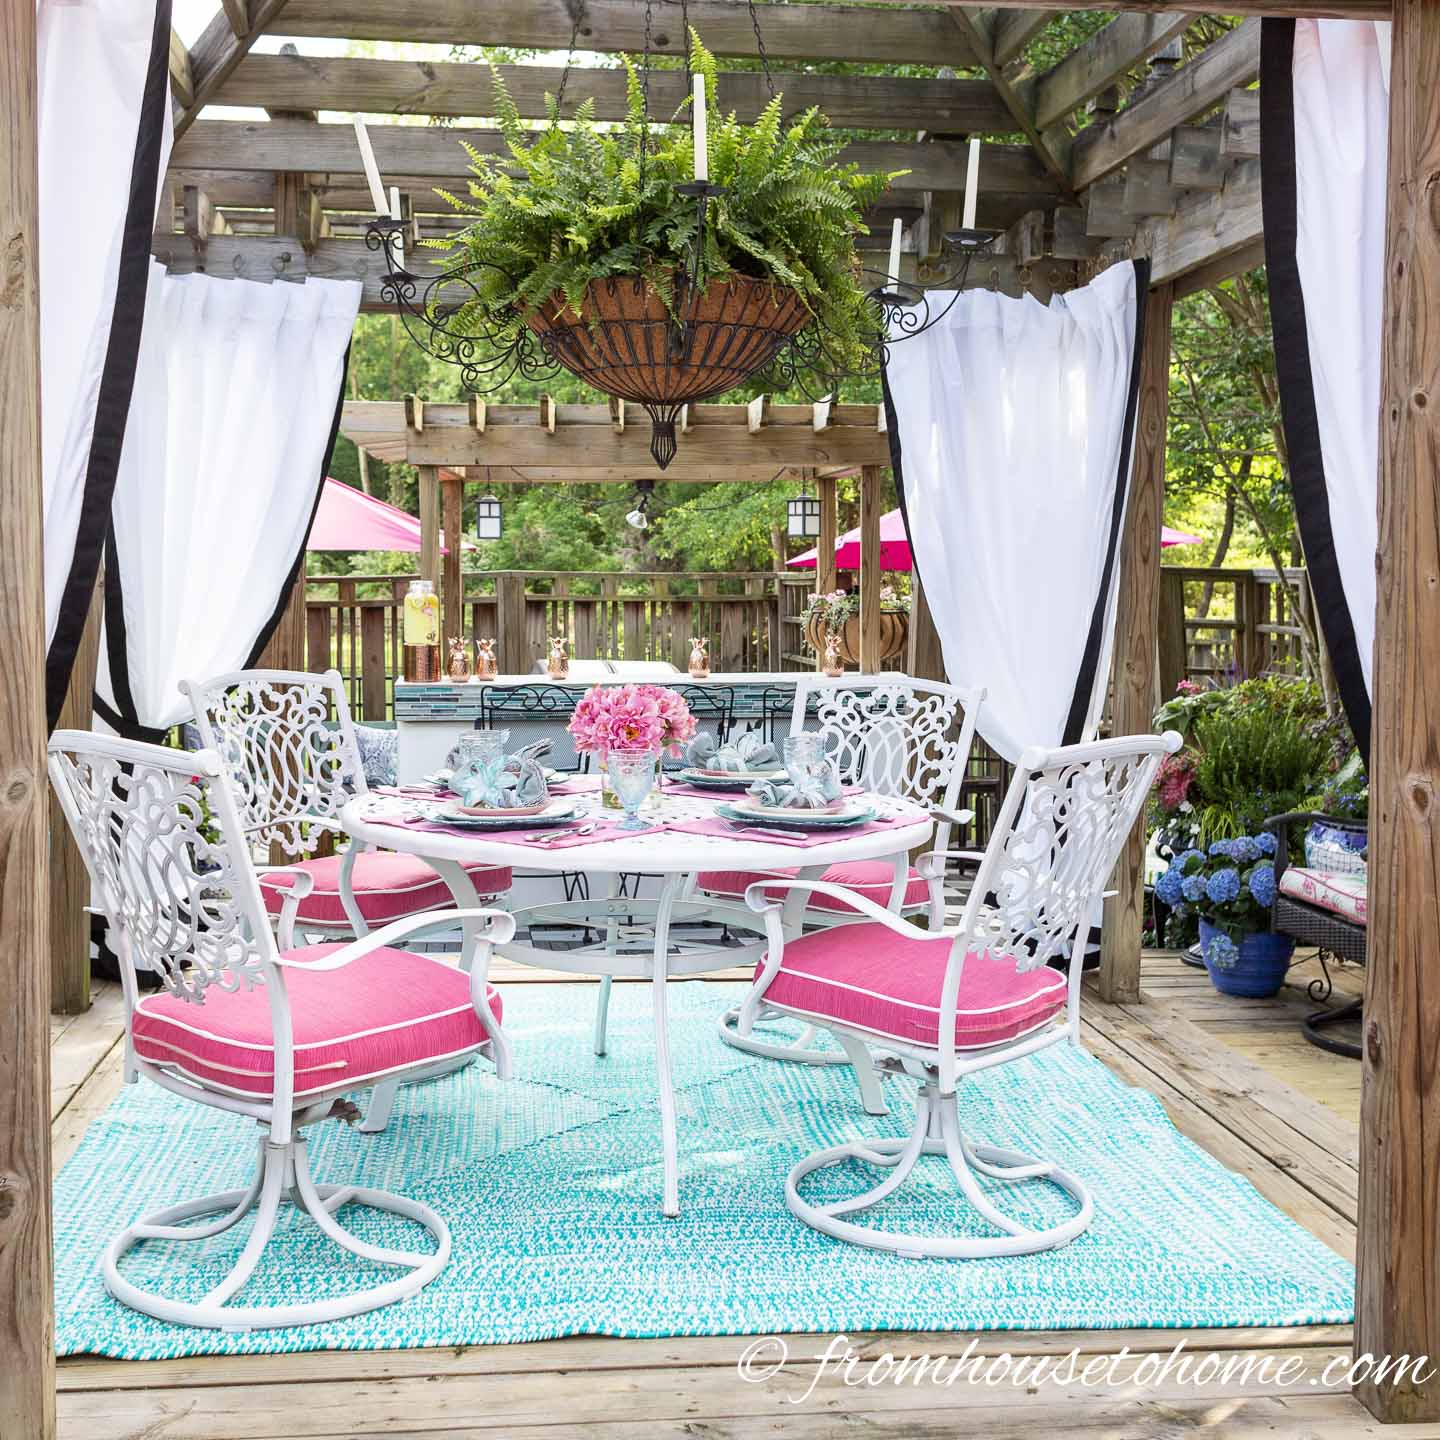 An outdoor dining table under a pergola with white curtains in each of the curtains